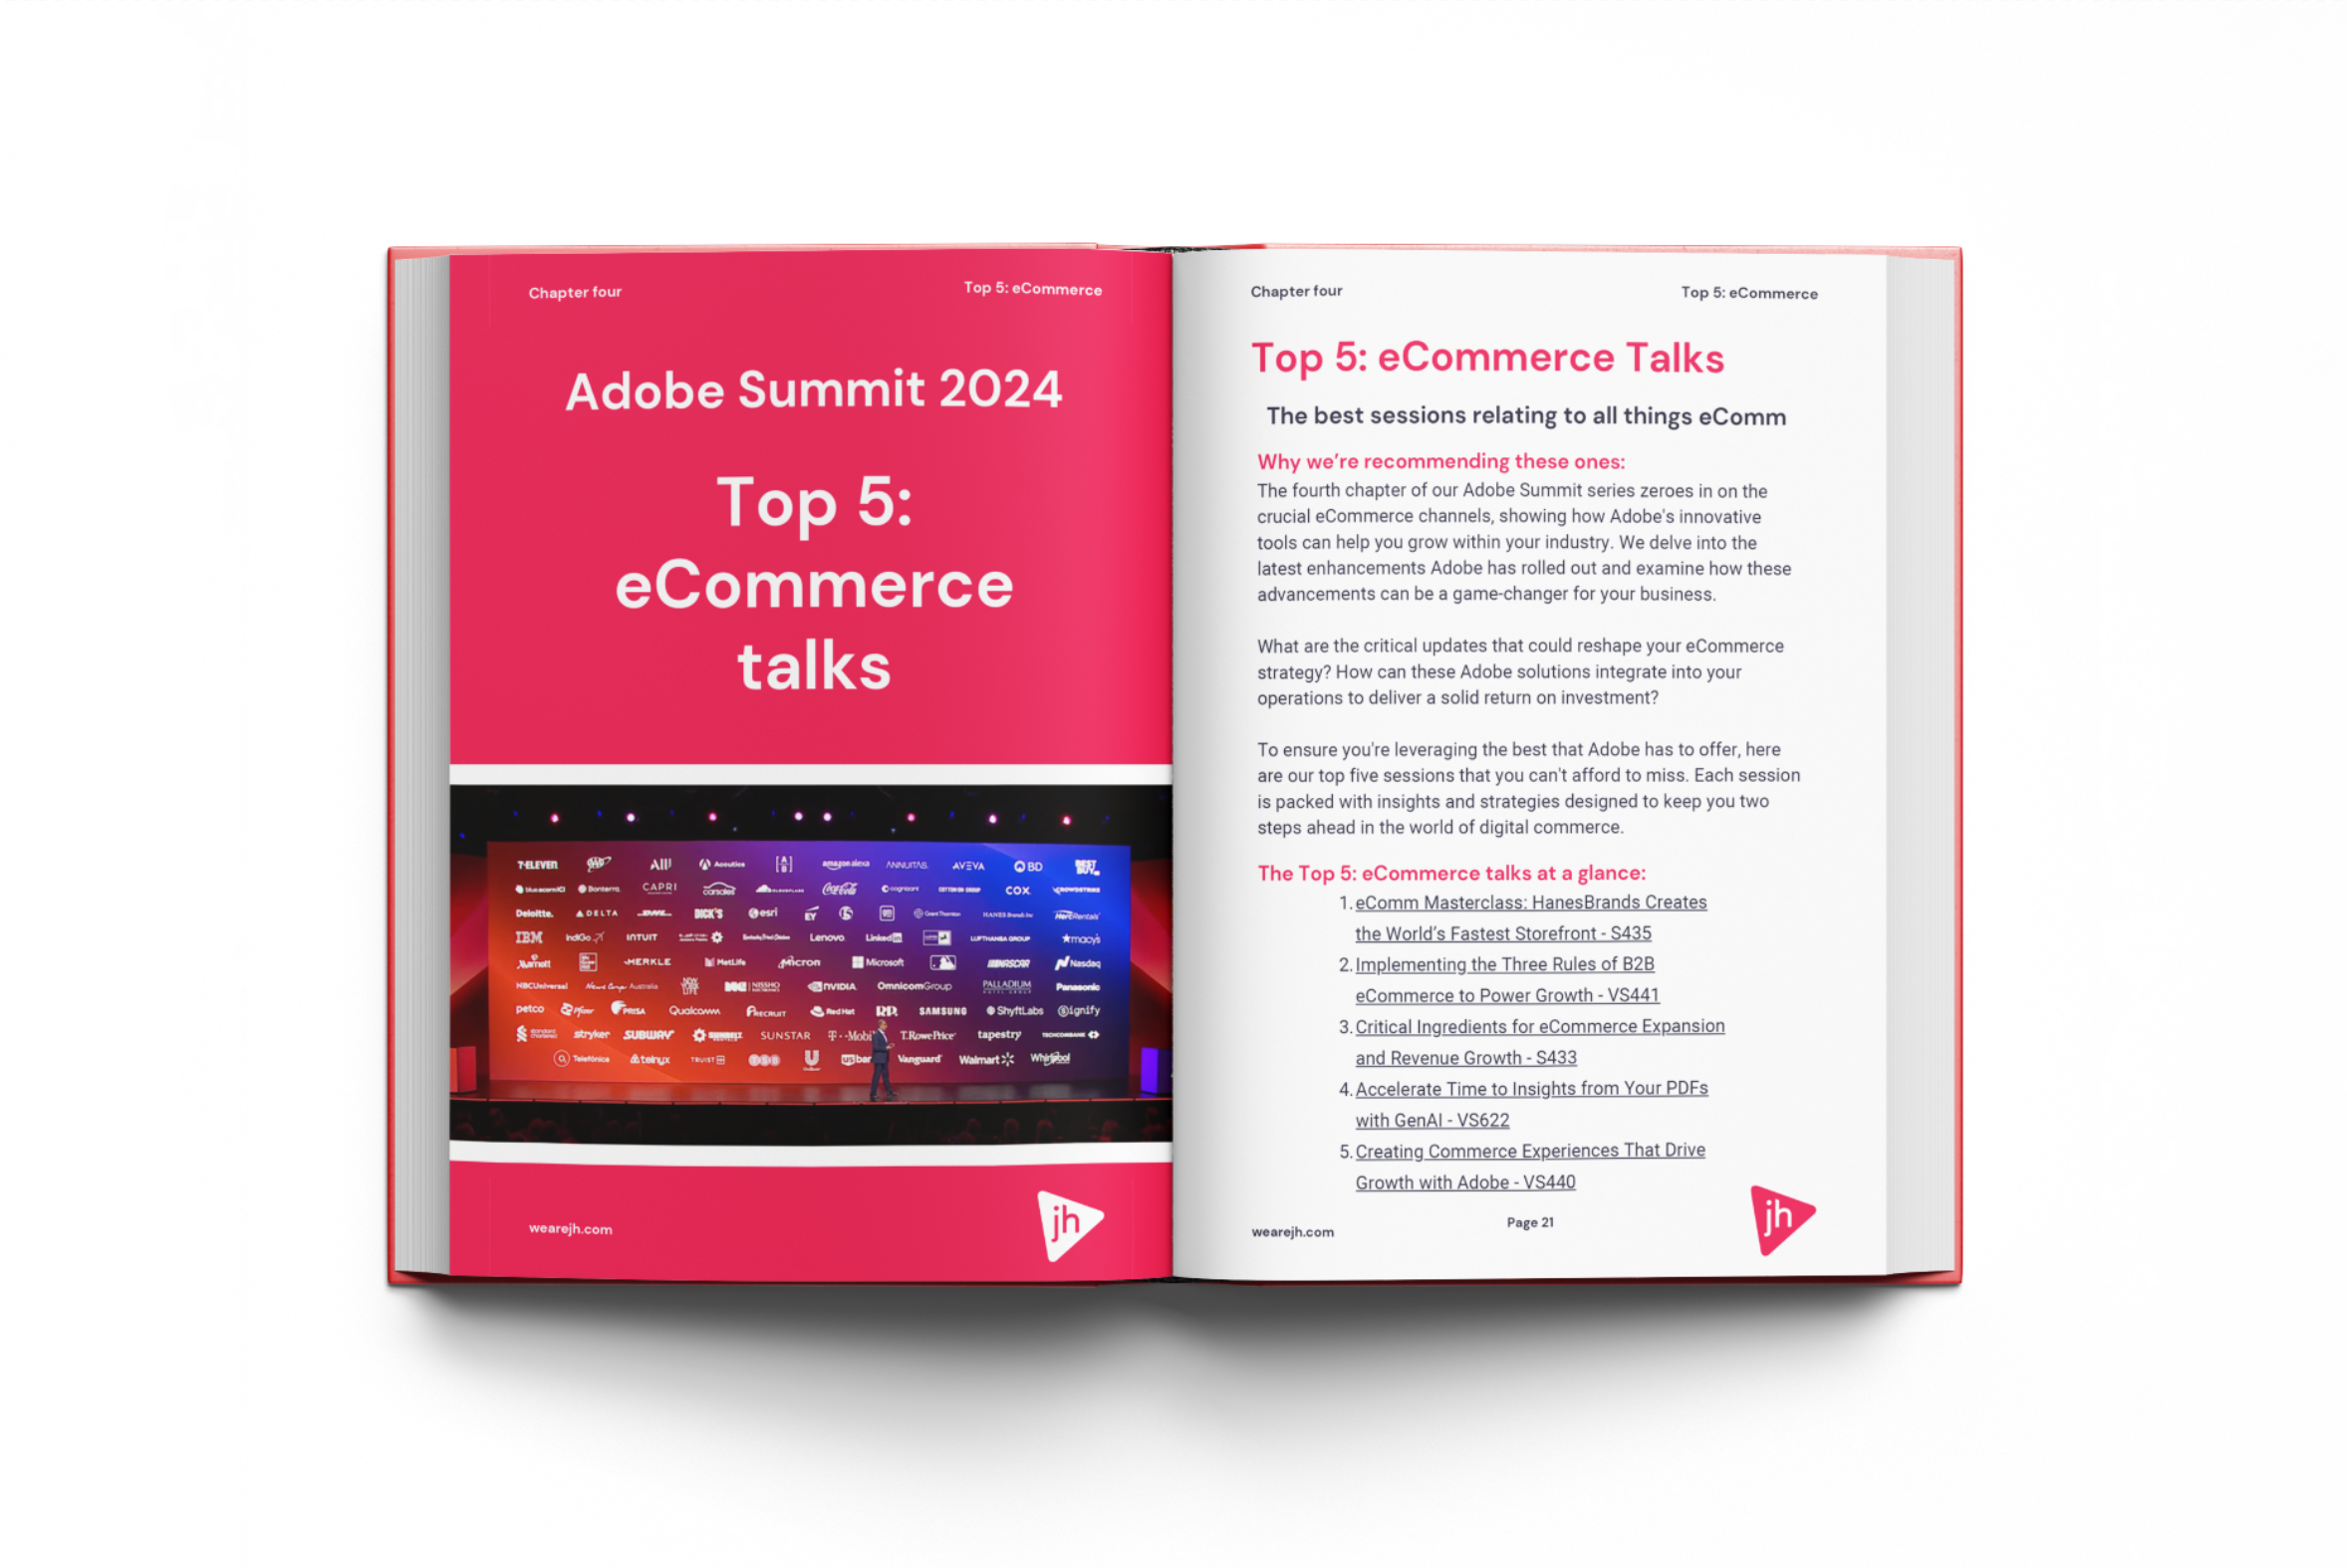 Adobe Summit 2024: The Definitive What To Watch Guide